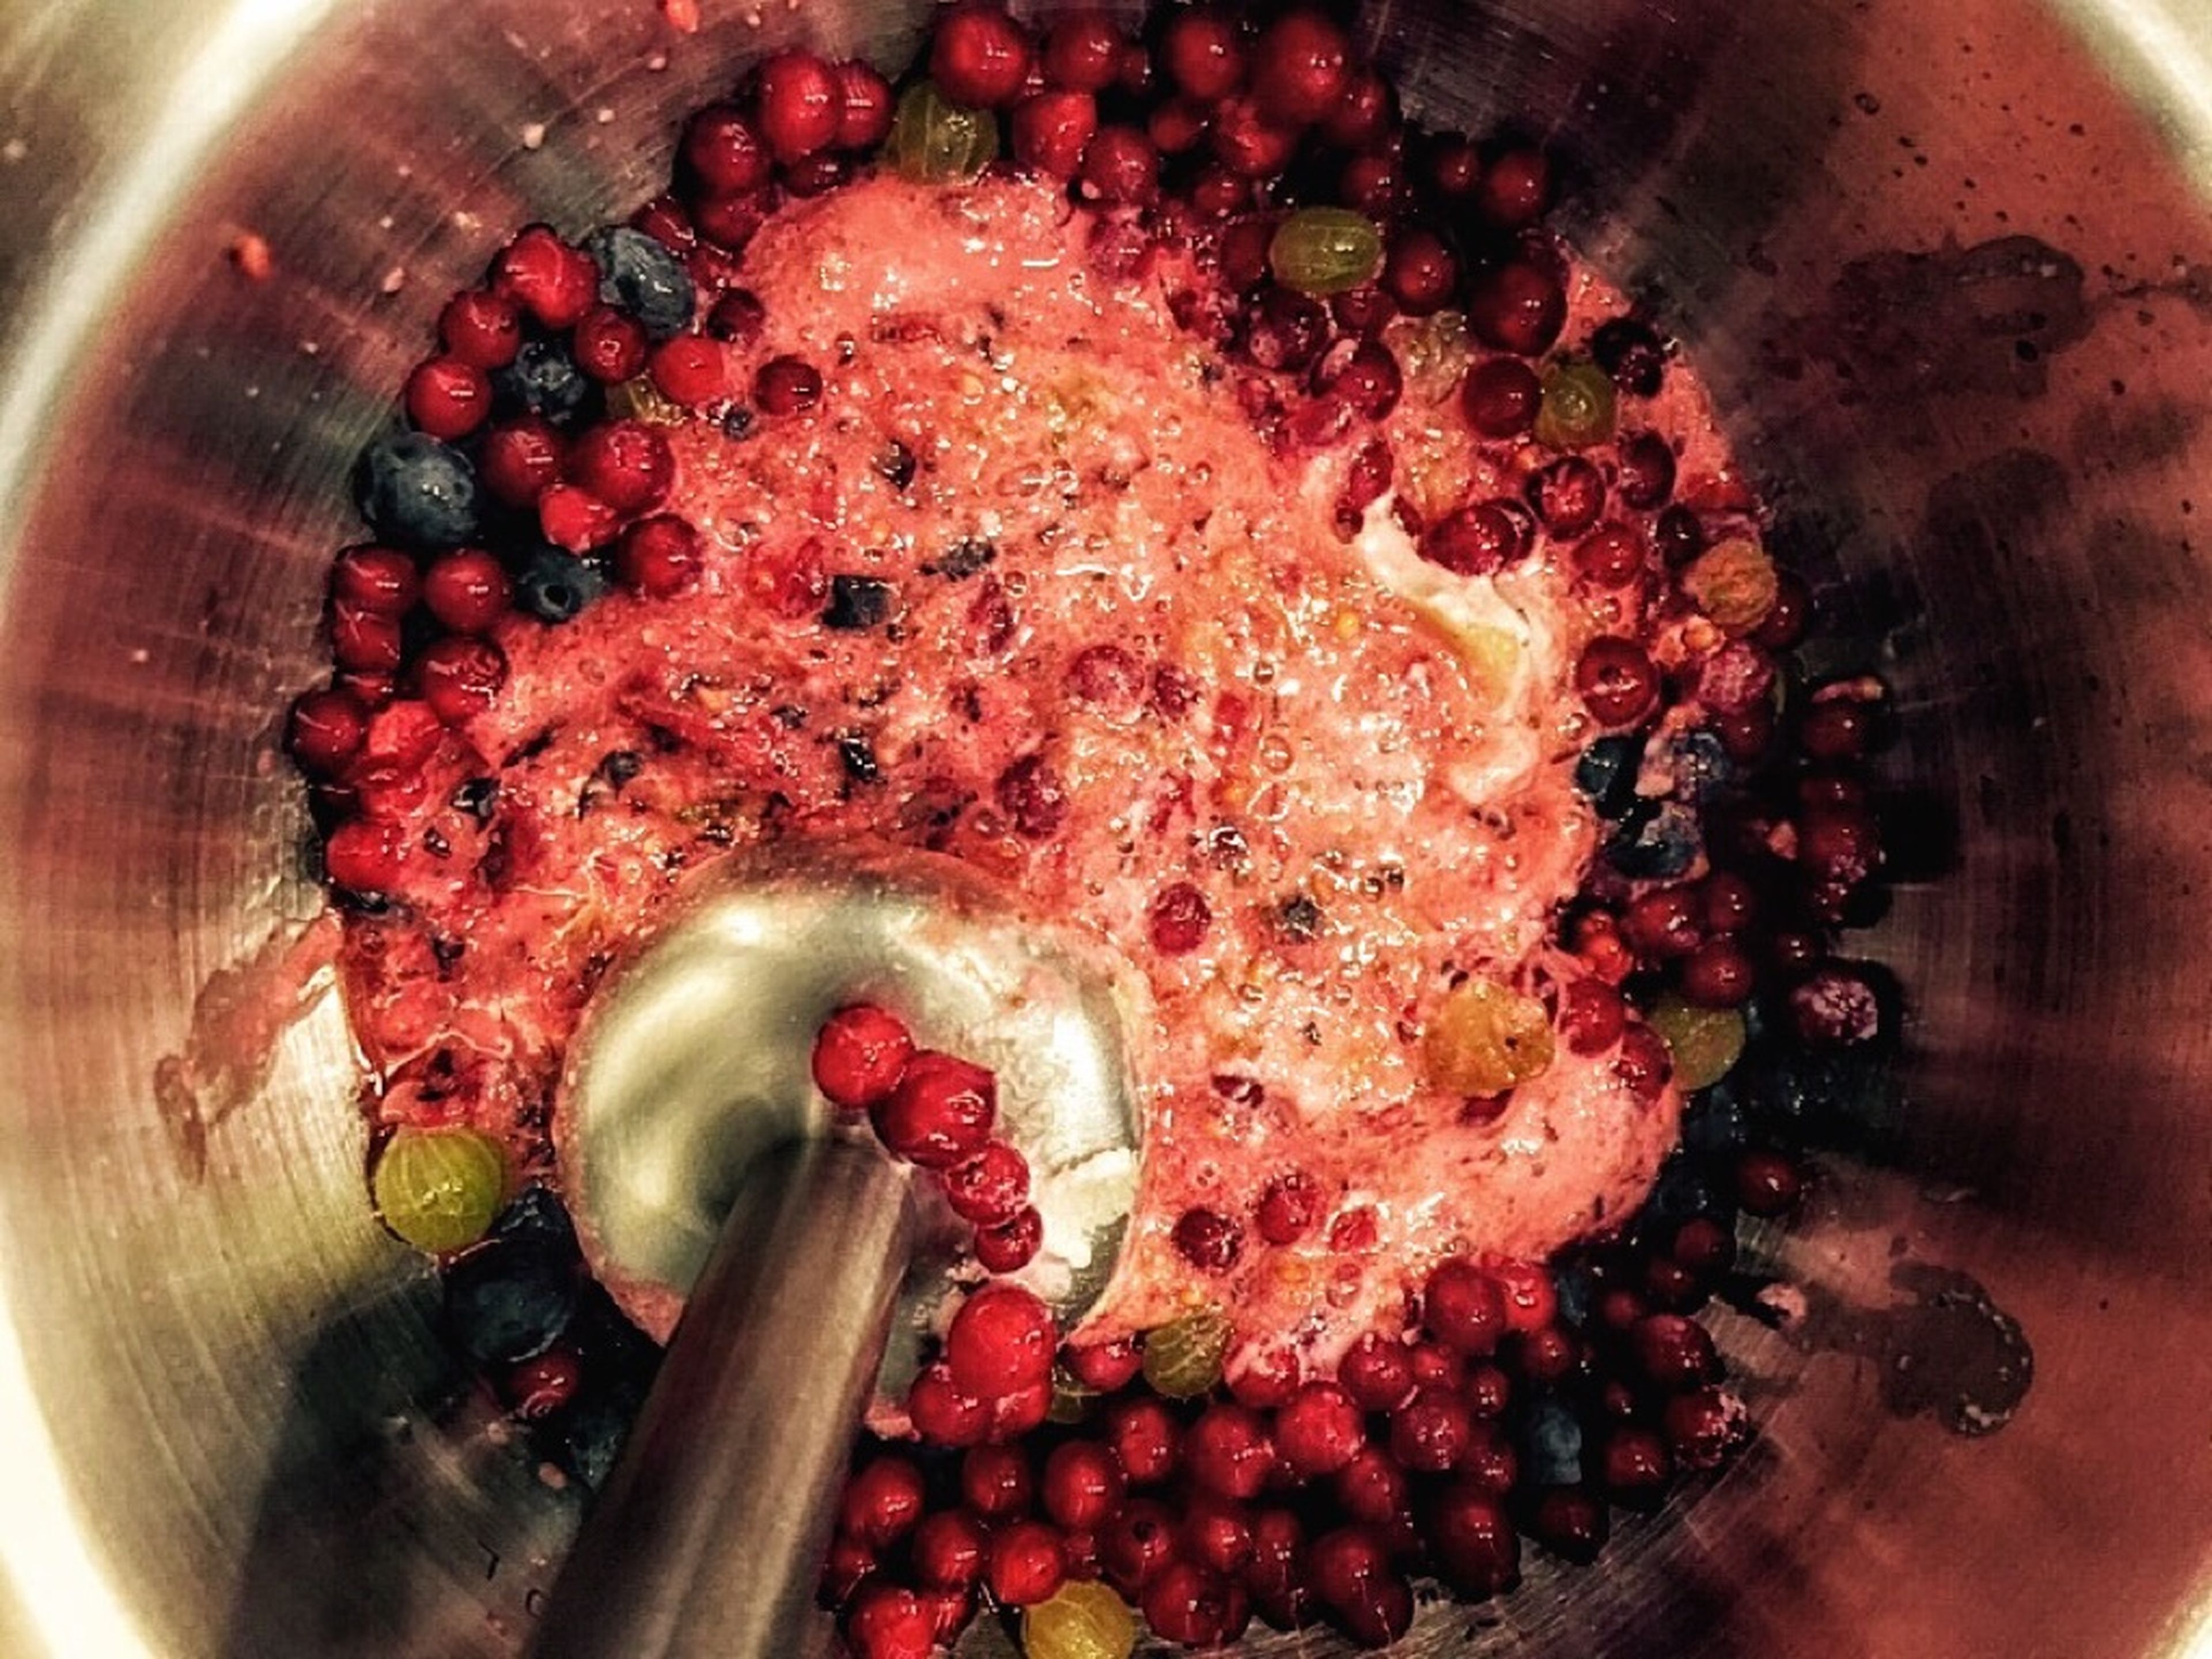 Wash berries, put in a bowl with marzipan, and purée.